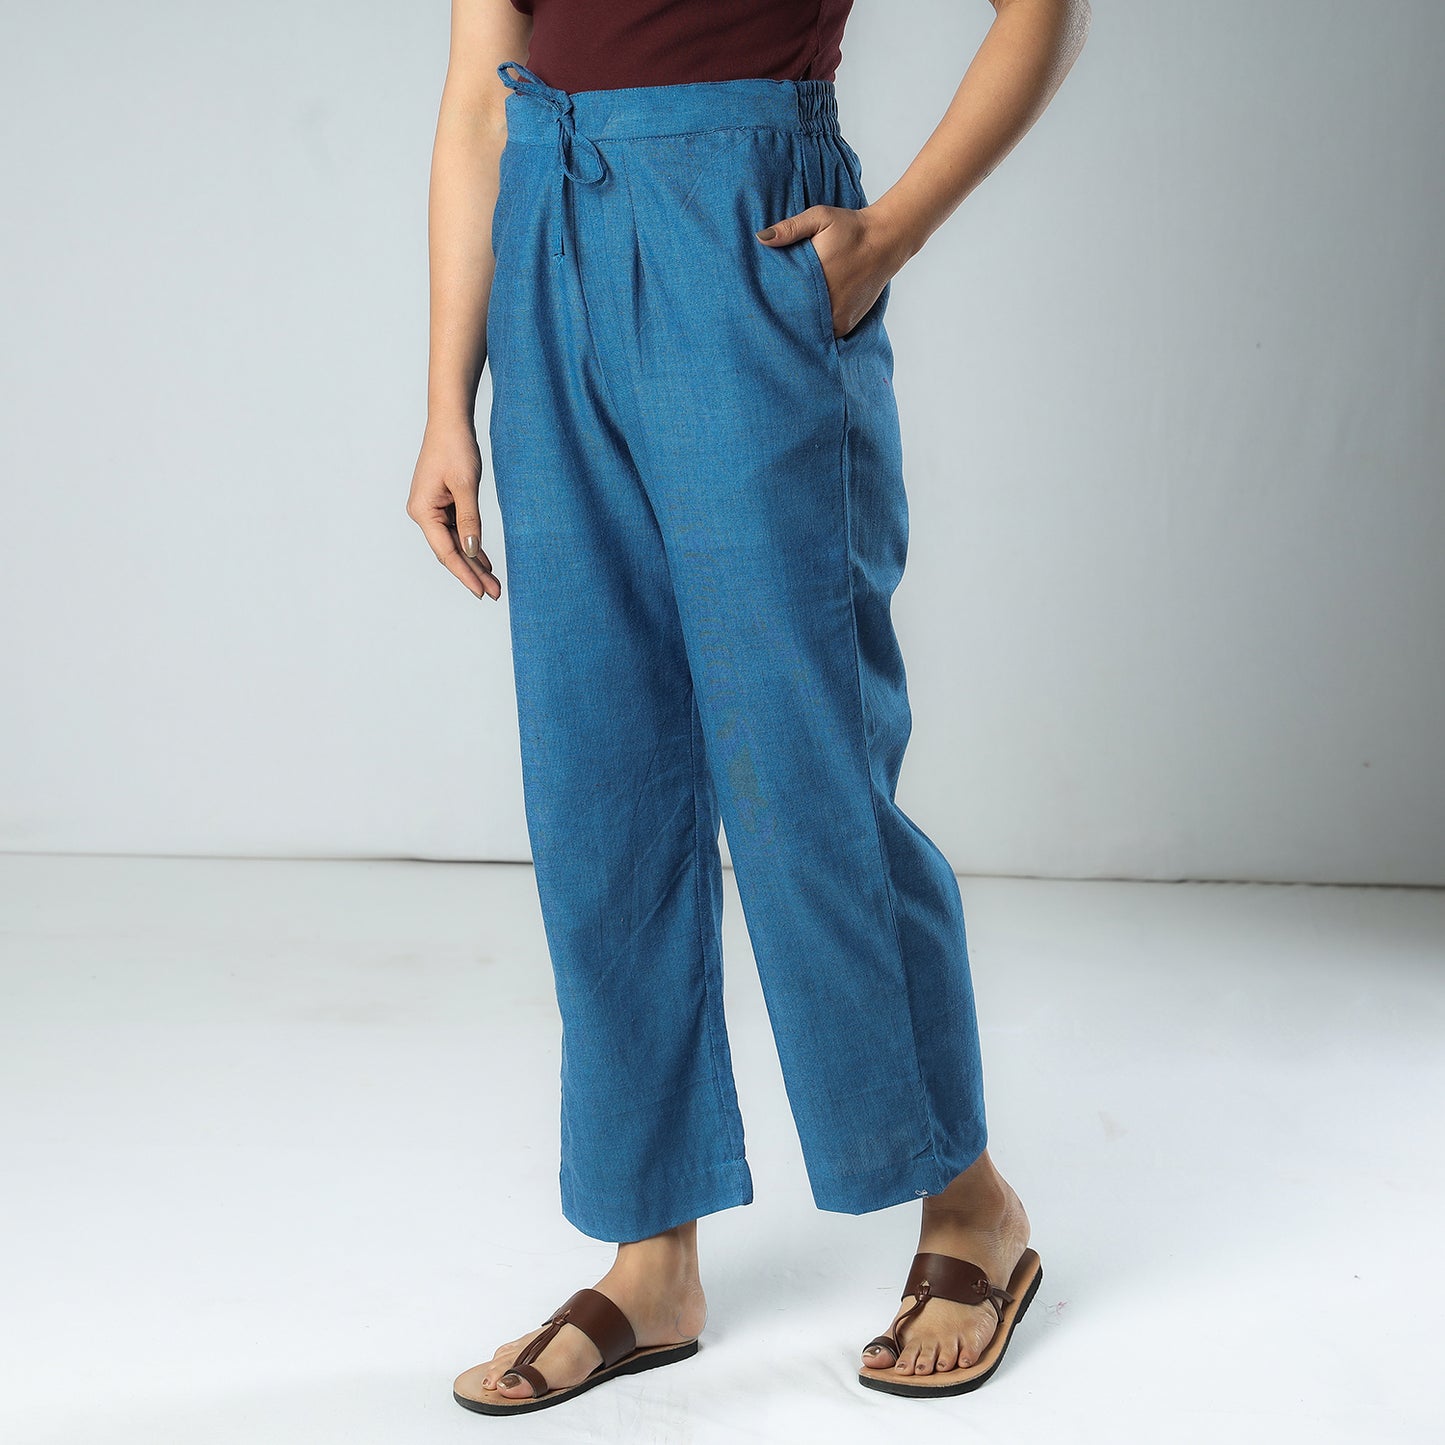 Blue Texture Plain Dyed Cotton Relaxed Fit Pant